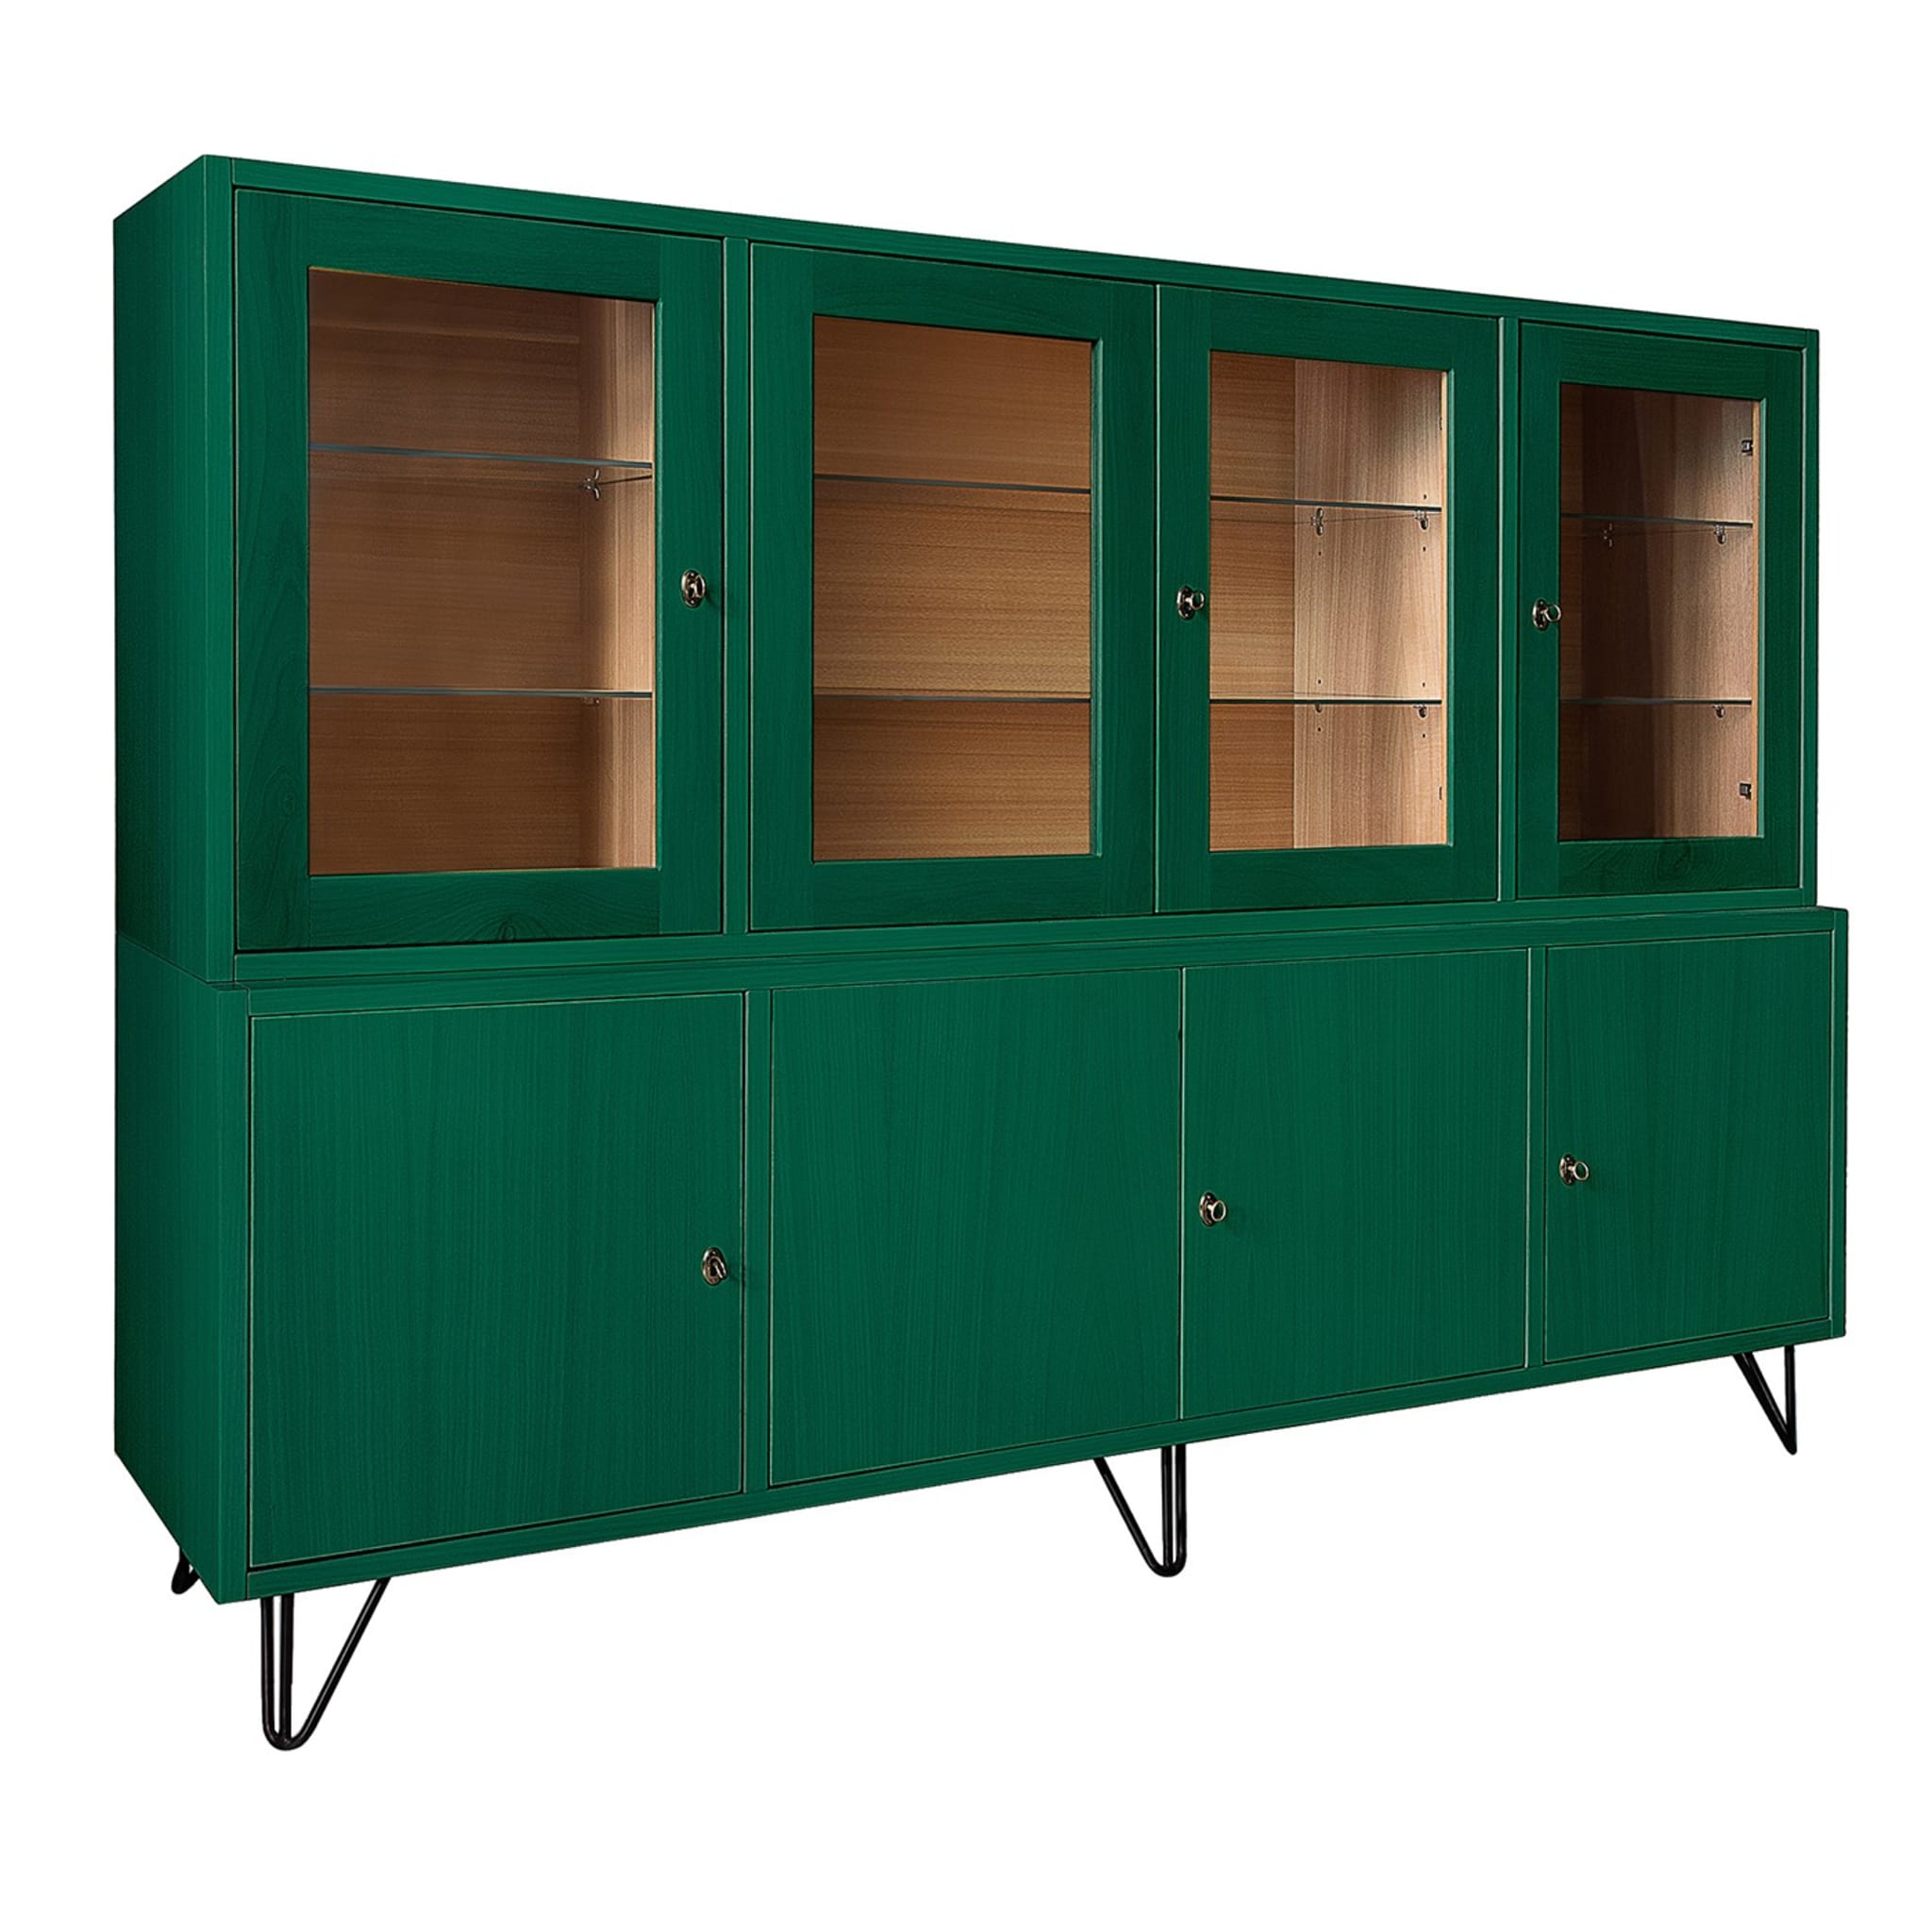 Eroica Green Cabinet by Eugenio Gambella - Main view